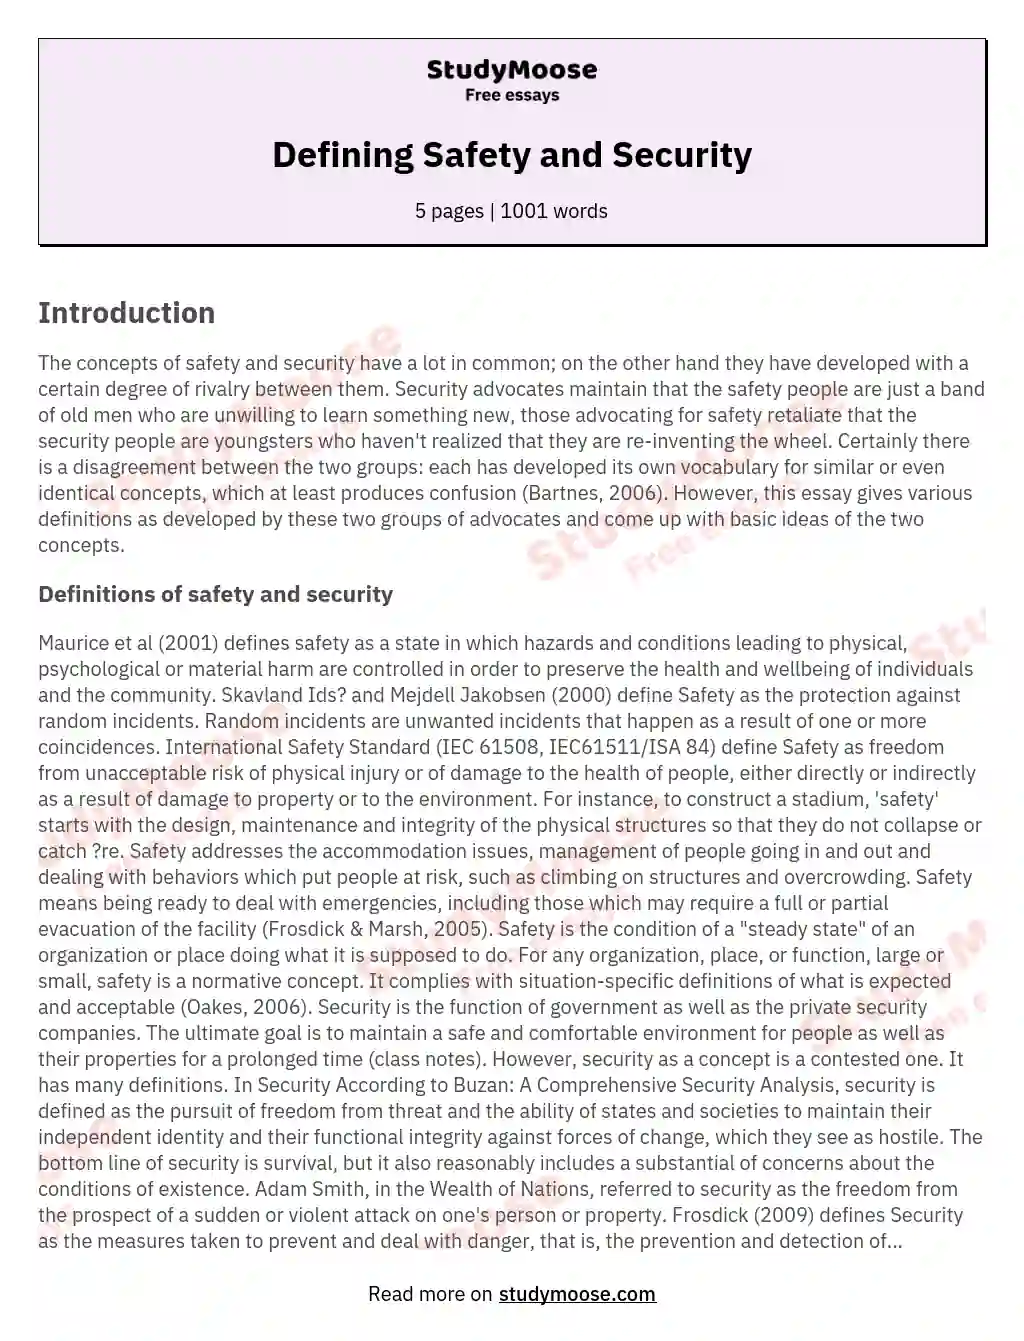 Defining Safety and Security essay